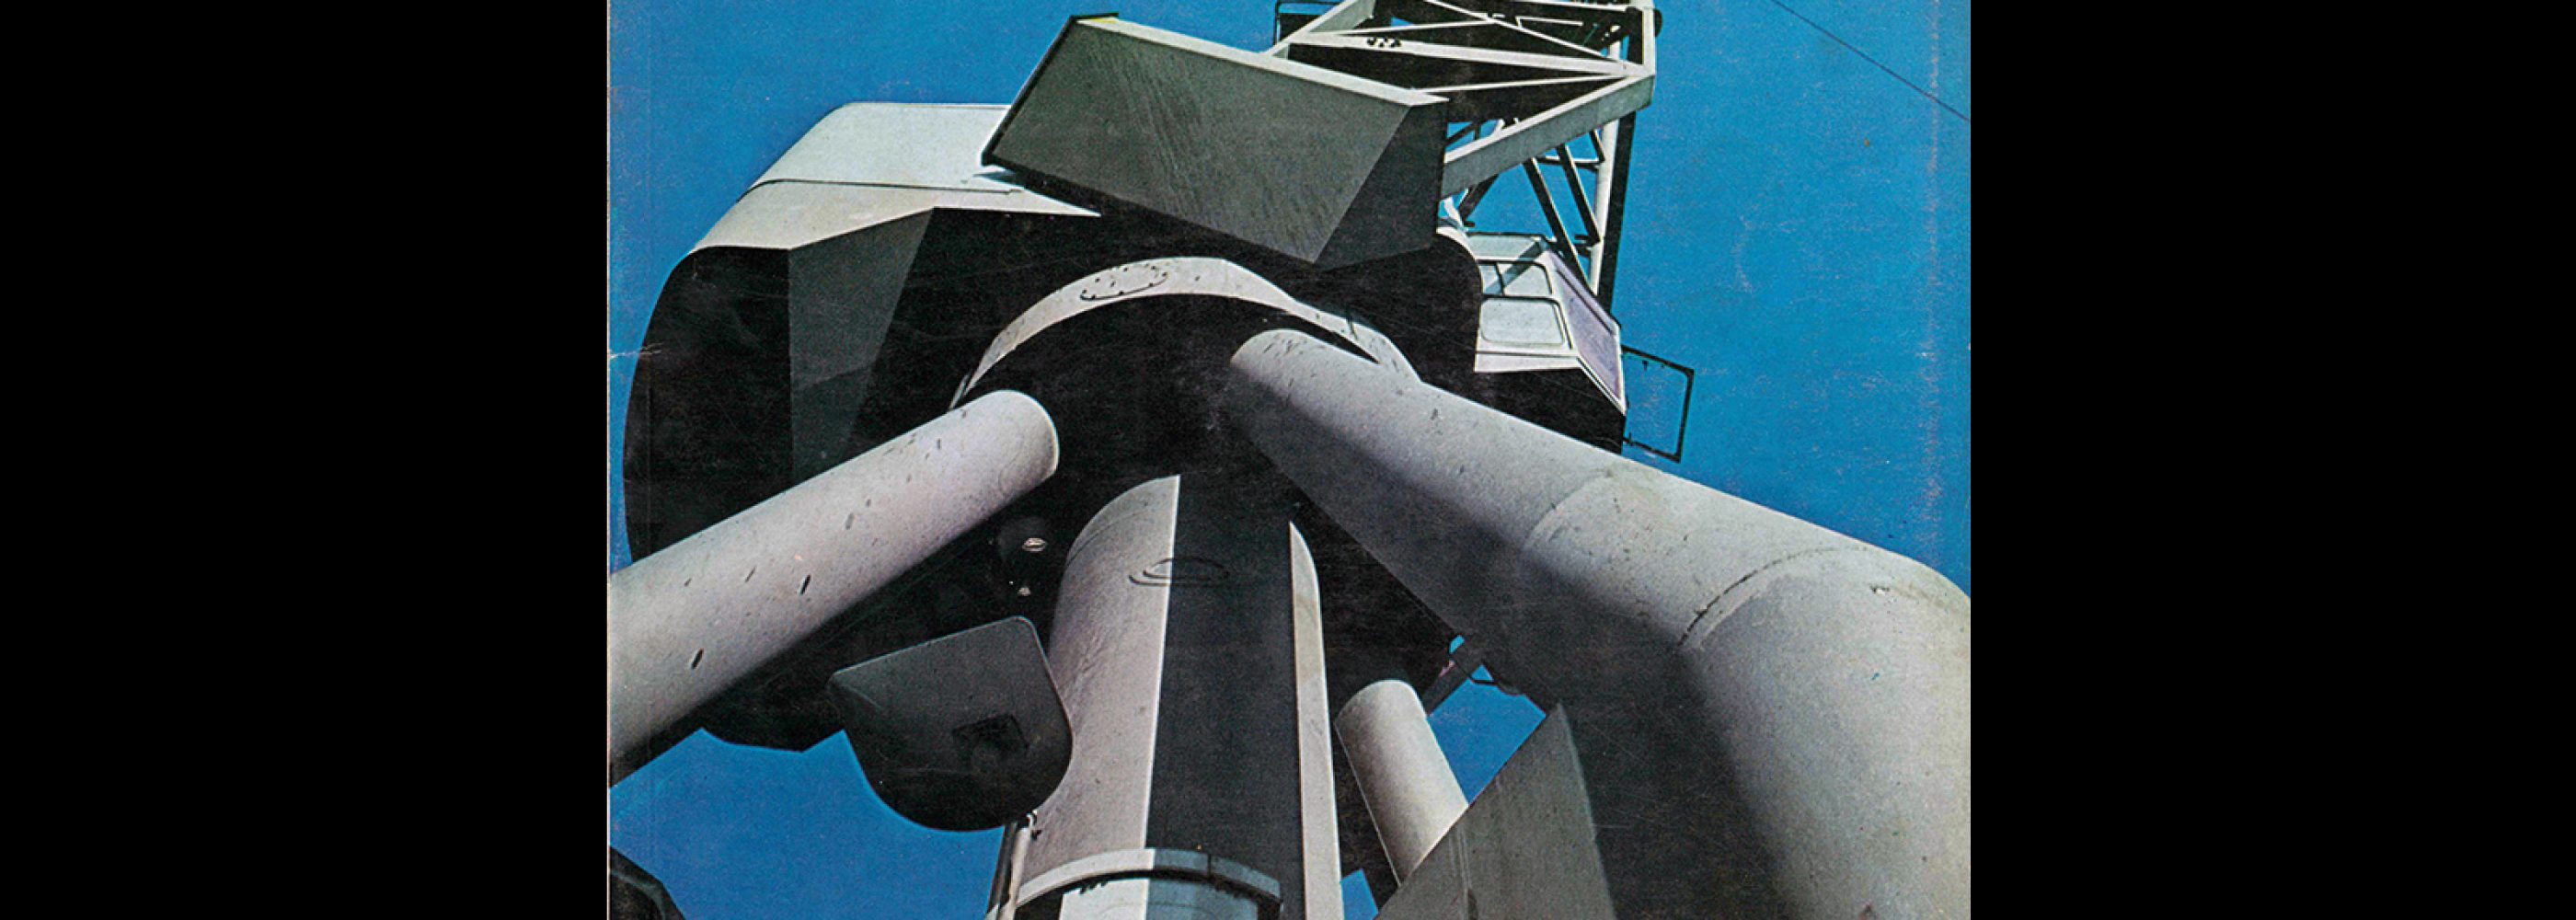 Design, Council of Industrial Design, 233, May 1968. Cover photo by Ray Dean